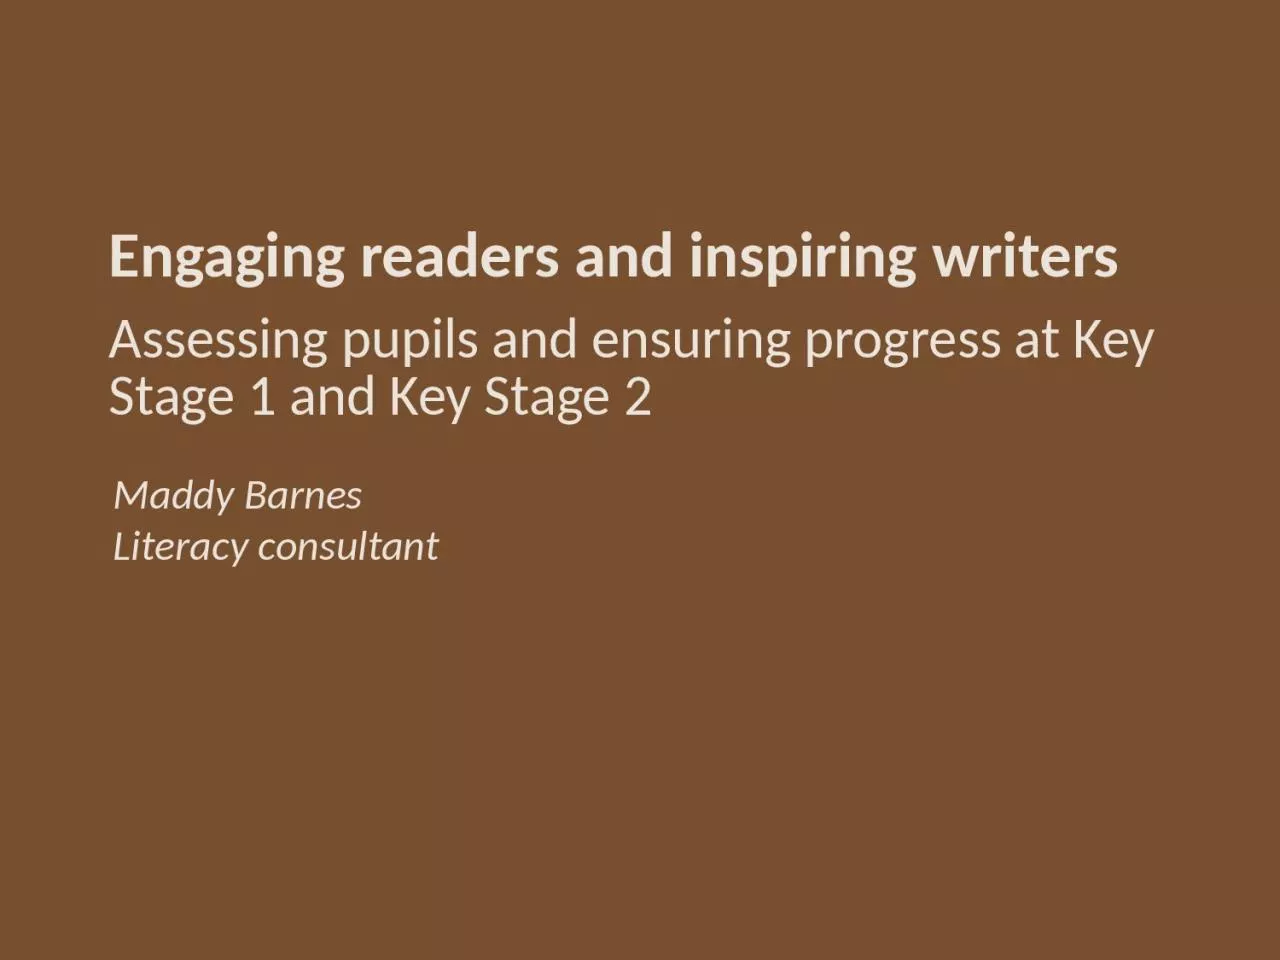 Engaging readers and inspiring writers